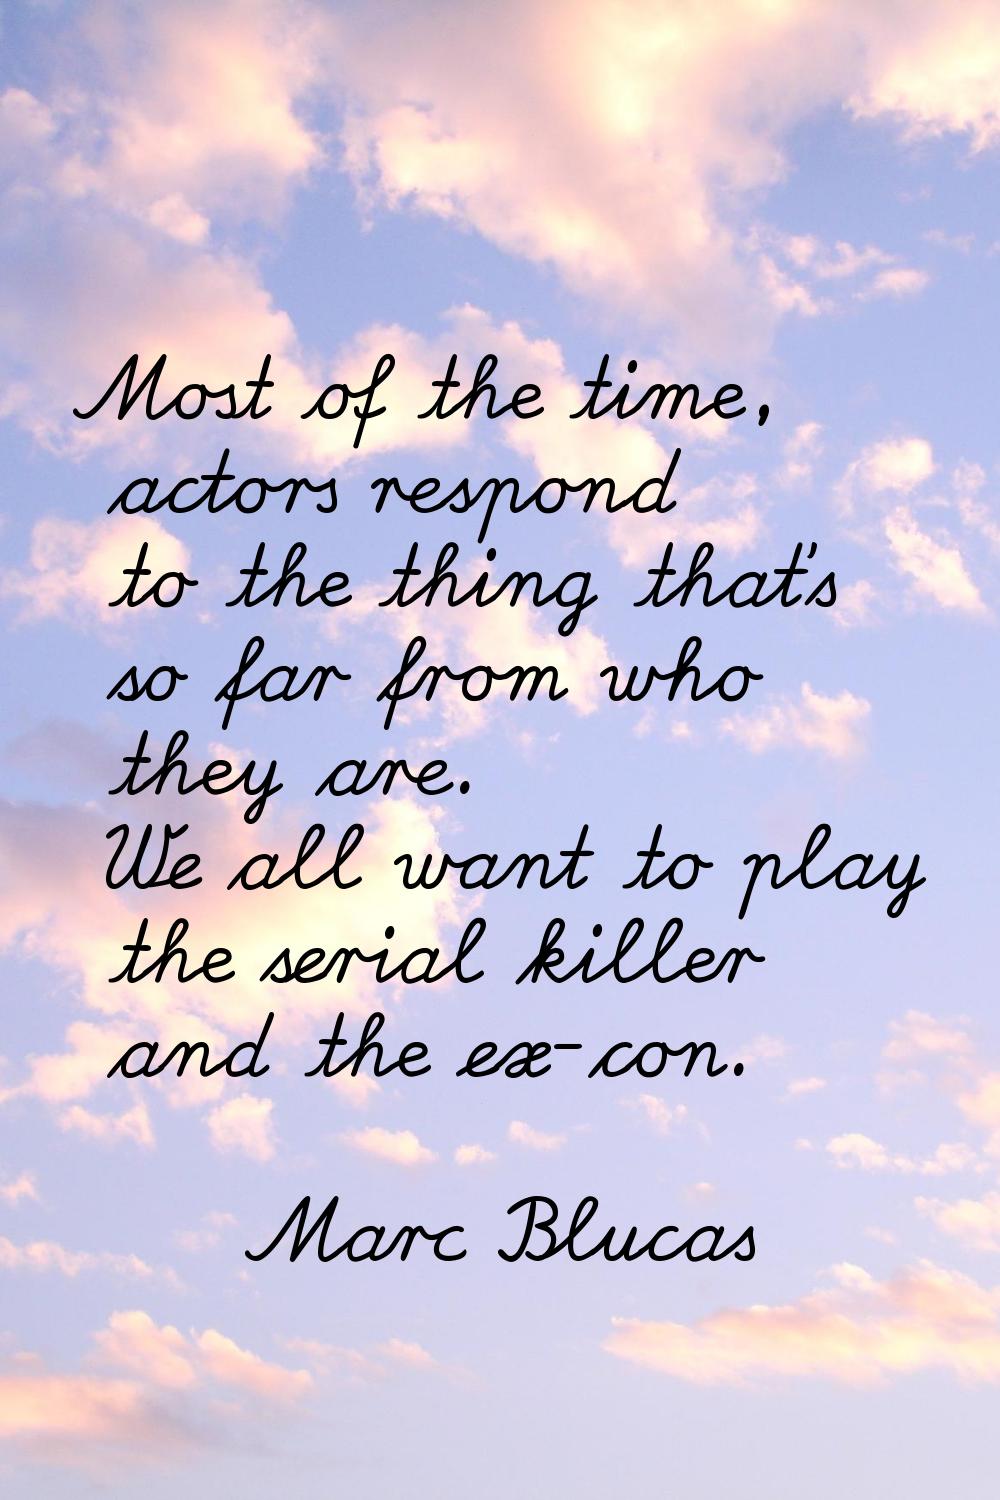 Most of the time, actors respond to the thing that's so far from who they are. We all want to play 